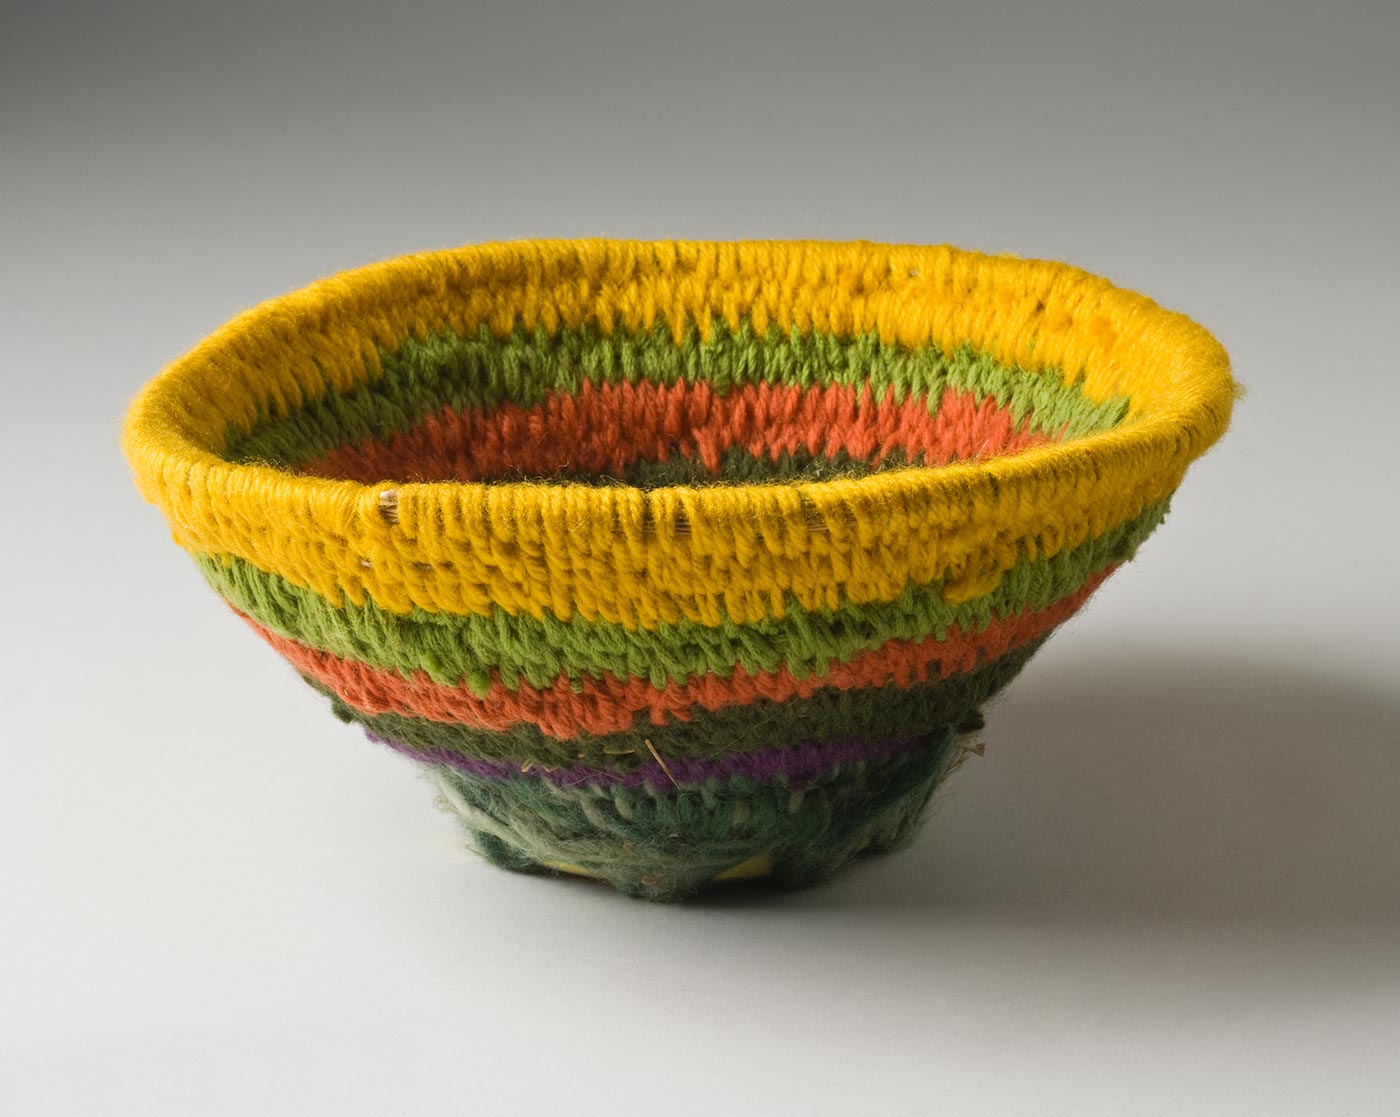 A circular coiled striped yarn basket over plant fibre, with a metal base. The basket has a circular tobacco tin base with text on the back and holes punched around the base. The yarn coiled fibre section is attached with yarn through the holes in the tin, and opens out toward the top. The basket has a stripe of yellow at the top edge followed by green, orange, dark green, purple and white-green. - click to view larger image